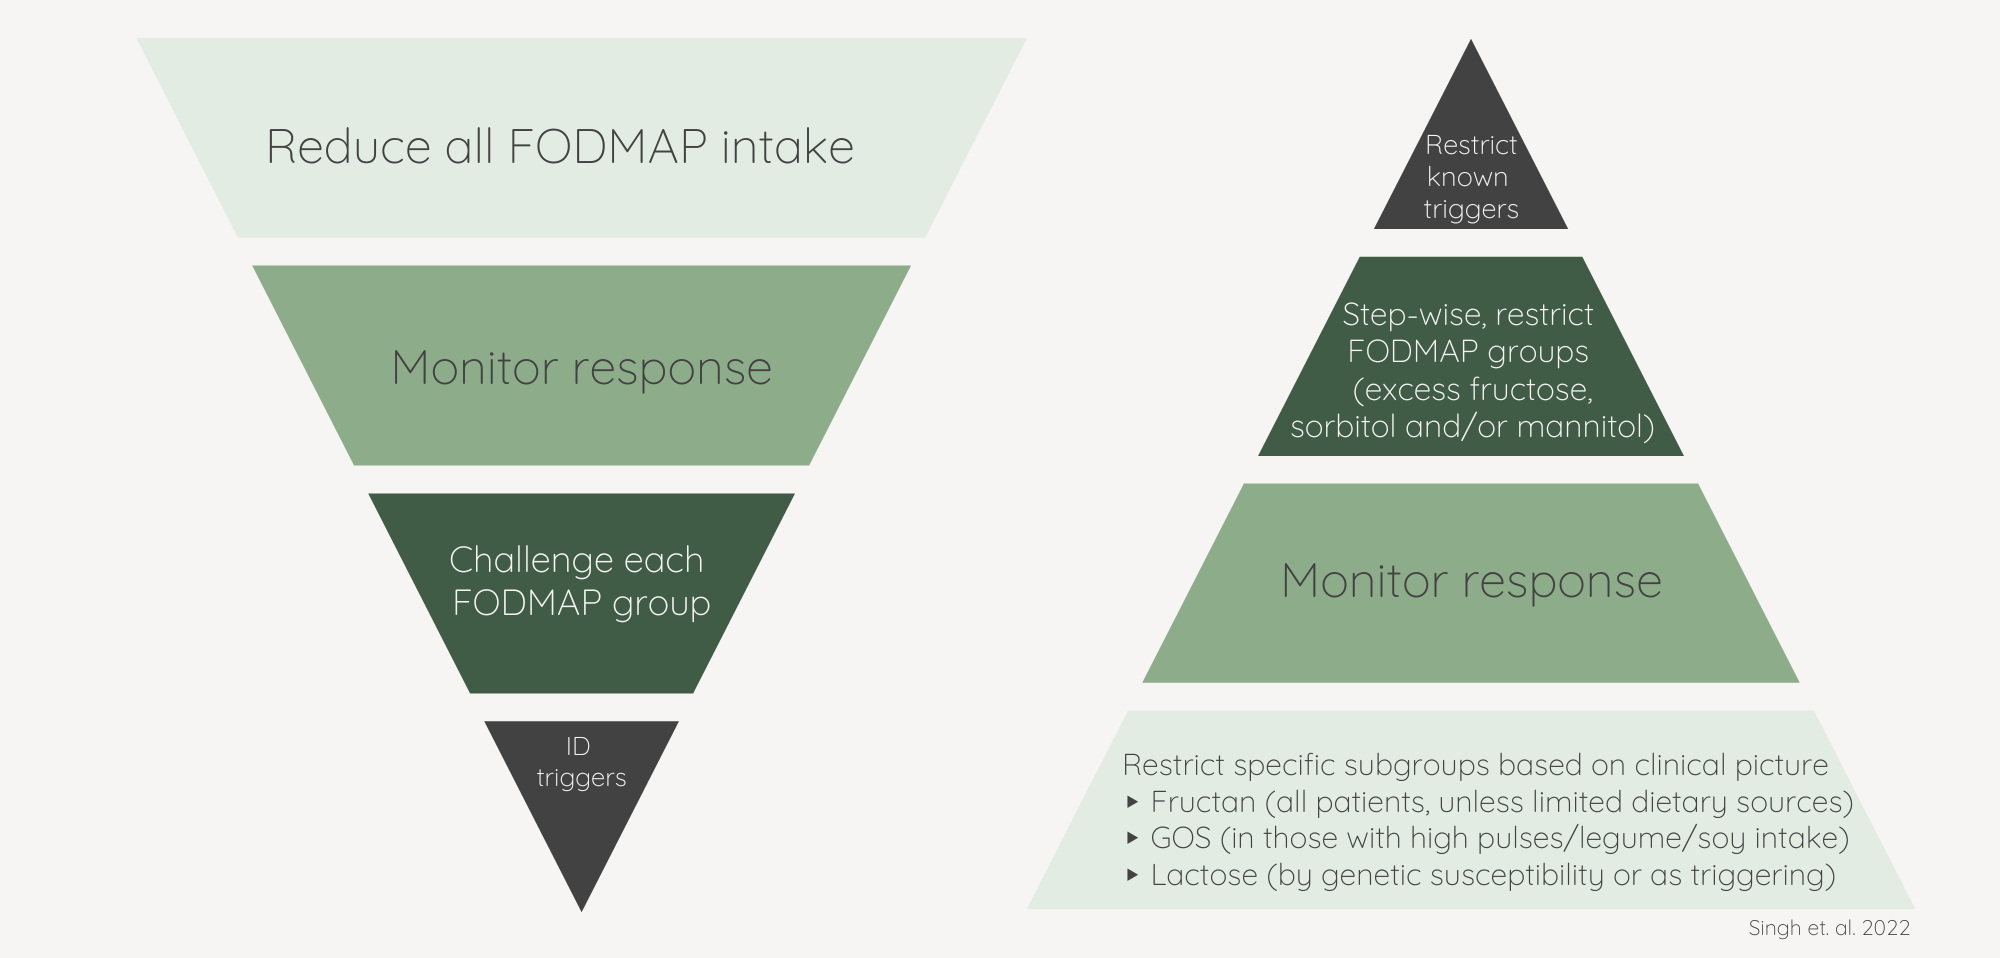 Top down vs. bottom up approach to FODMAP restriction